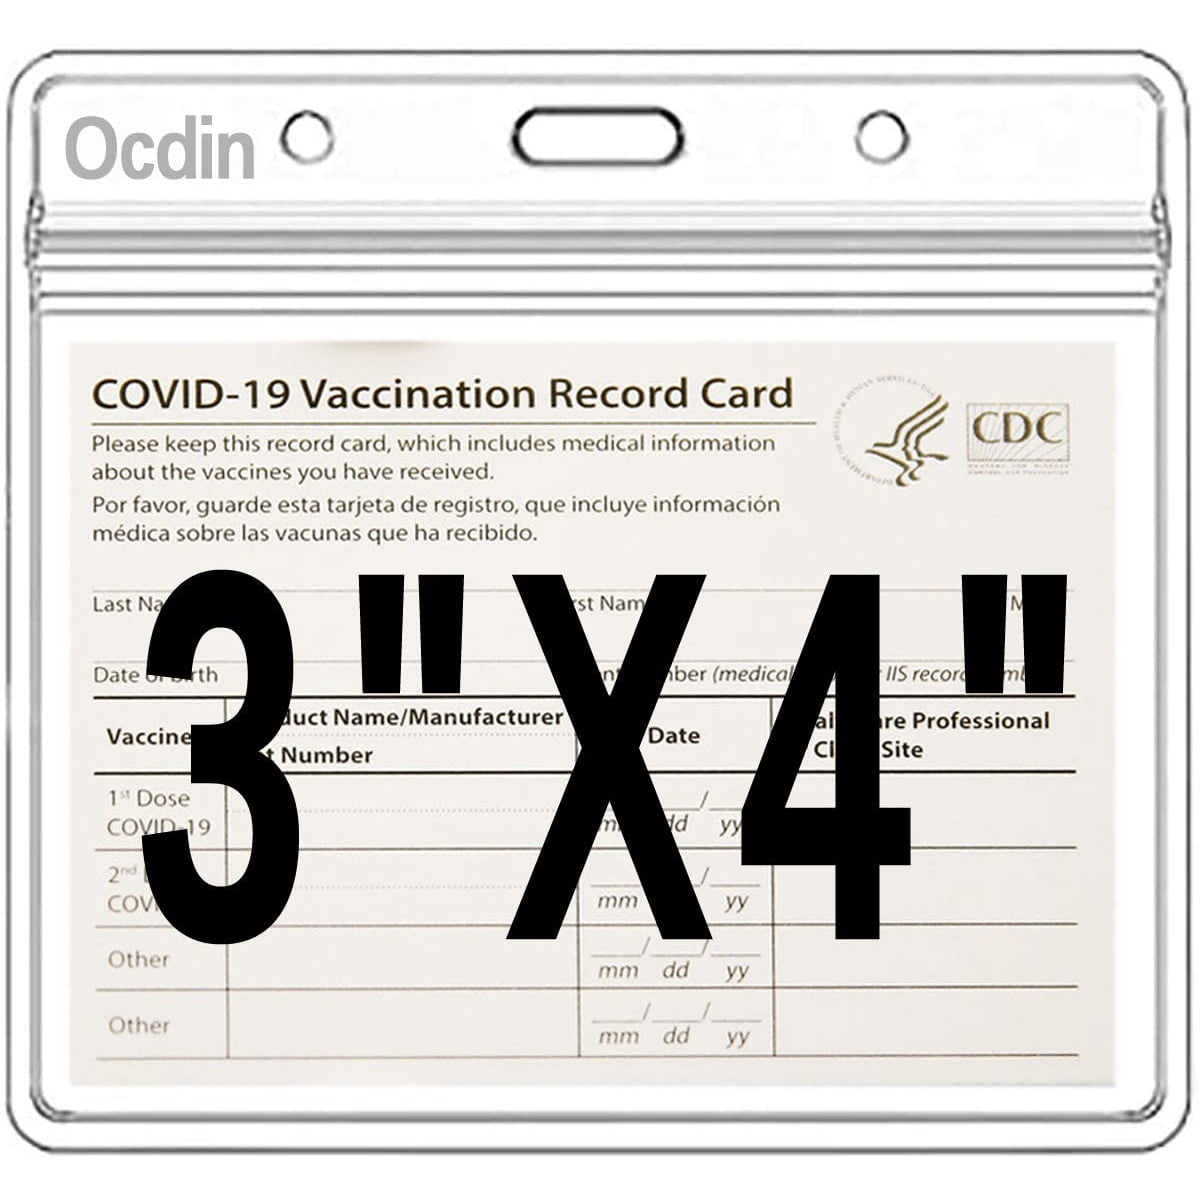 8 Protectors NO Lanyards CDC Vaccination Card Protector 4 X 3 in Immunization Record Vaccine Cards Holder Clear Vinyl Plastic Sleeve with Waterproof Type Resealable Zip